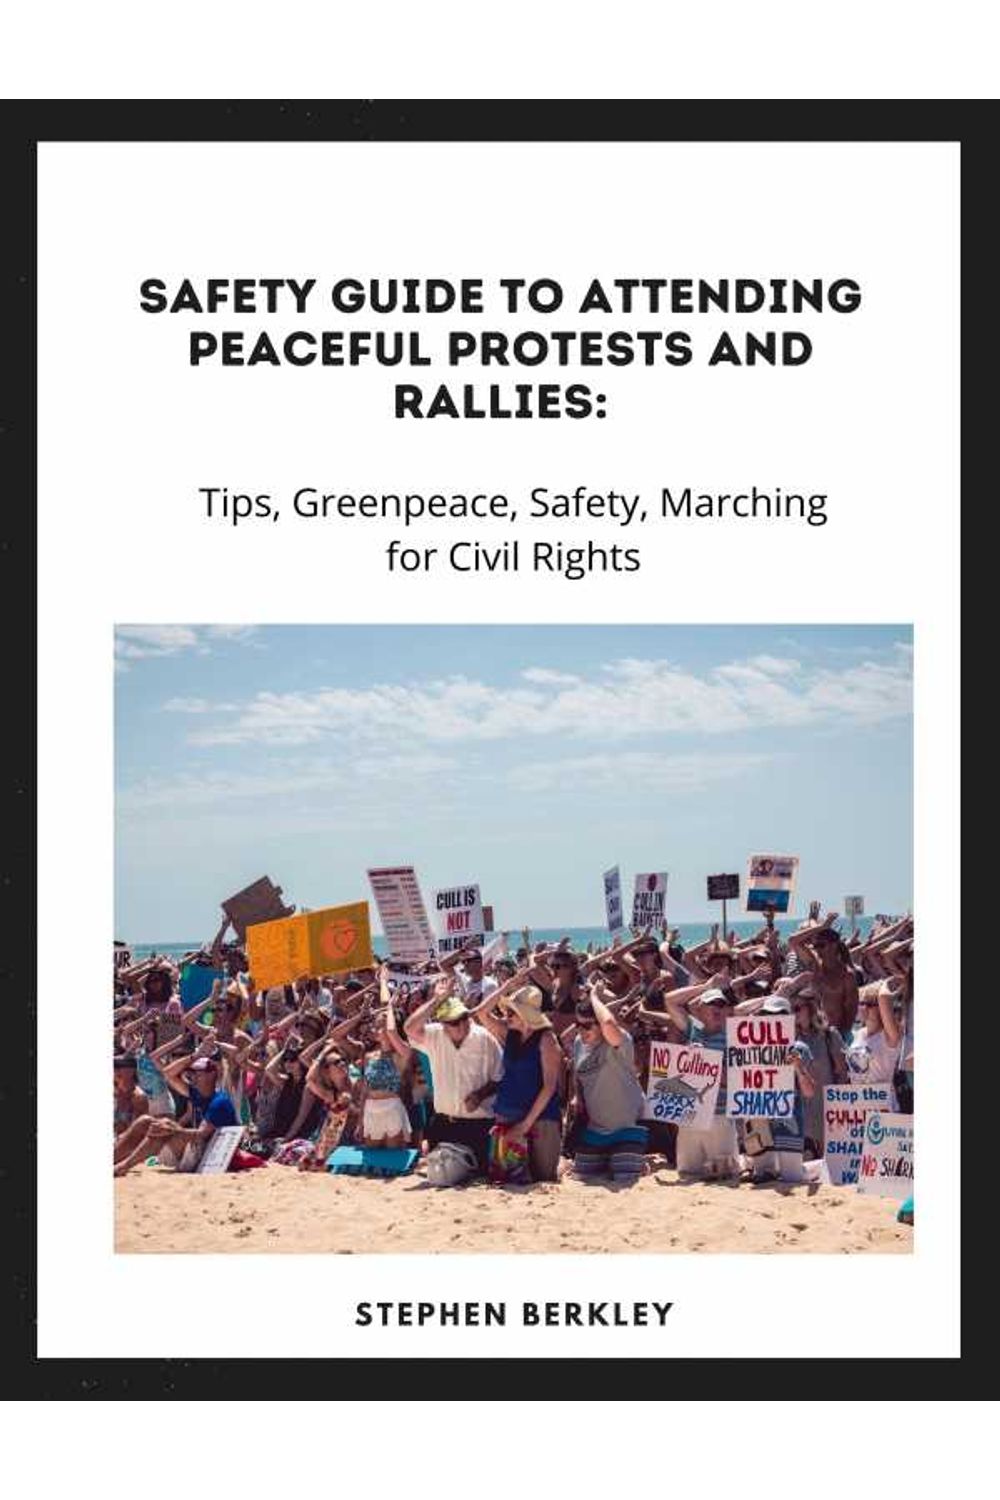 bw-safety-guide-to-attending-peaceful-protests-and-rallies-tips-greenpeace-safety-marching-for-civil-rights-abbott-properties-9783985511990